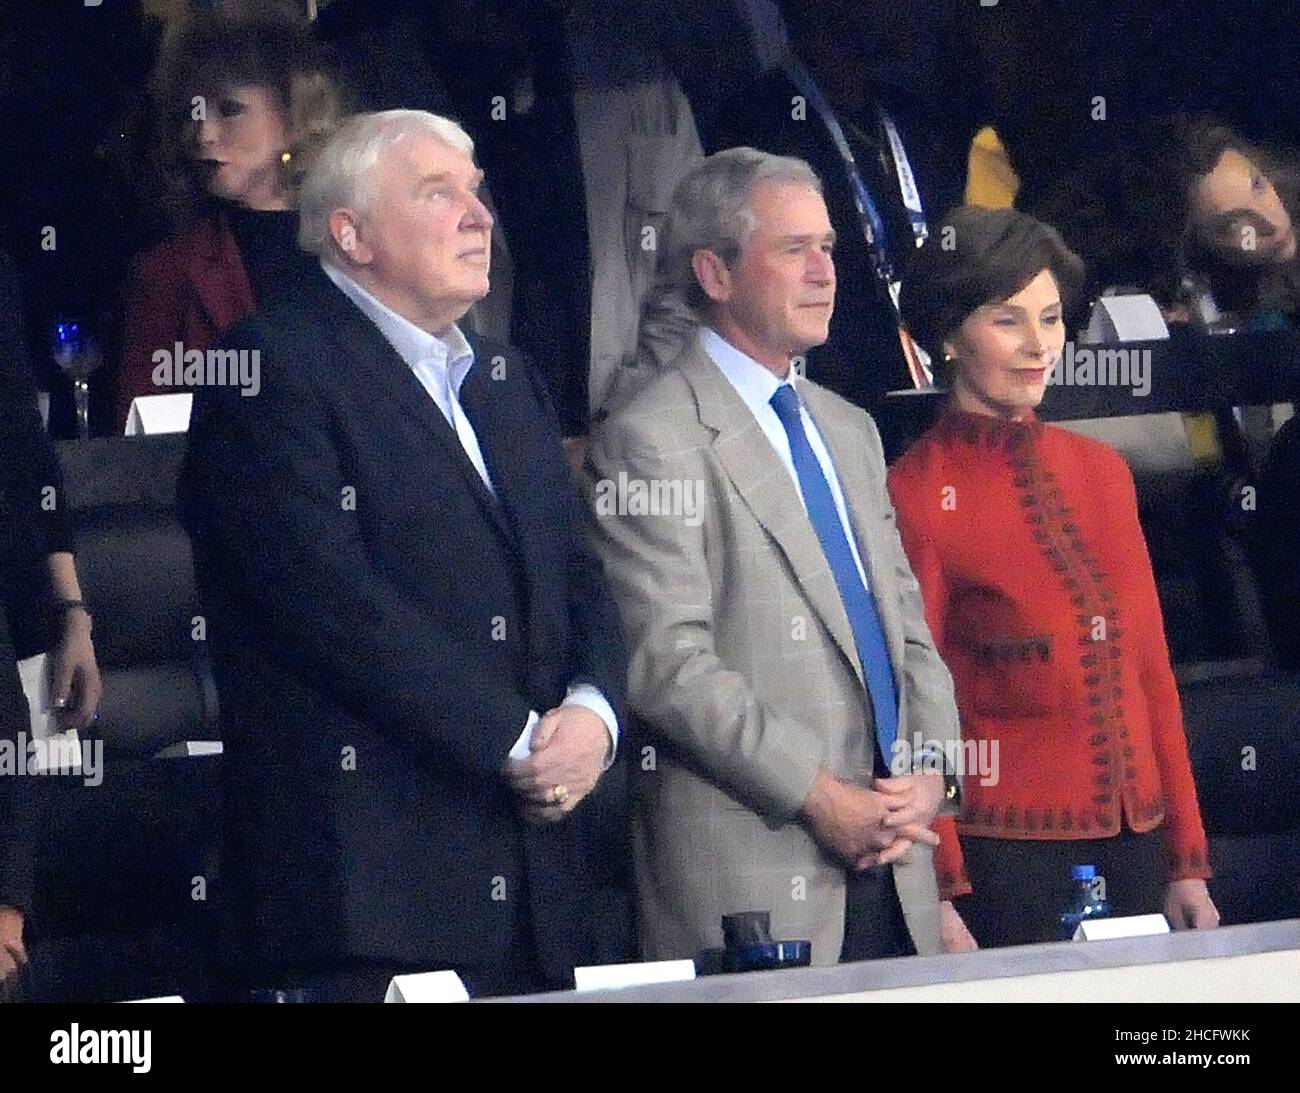 Arlington, USA. 06th Feb, 2011. John Madden (left) sits with former President George W. Bush and Laura Bush at Super Bowl XLV where the Green Bay Packers face the Pittsburgh Steelers at Cowboys Stadium in Arlington, Texas, Sunday, February 6, 2011. (Photo by Max Faulkner/Fort Worth Star-Telegram/MCT/Sipa USA) Credit: Sipa USA/Alamy Live News Stock Photo